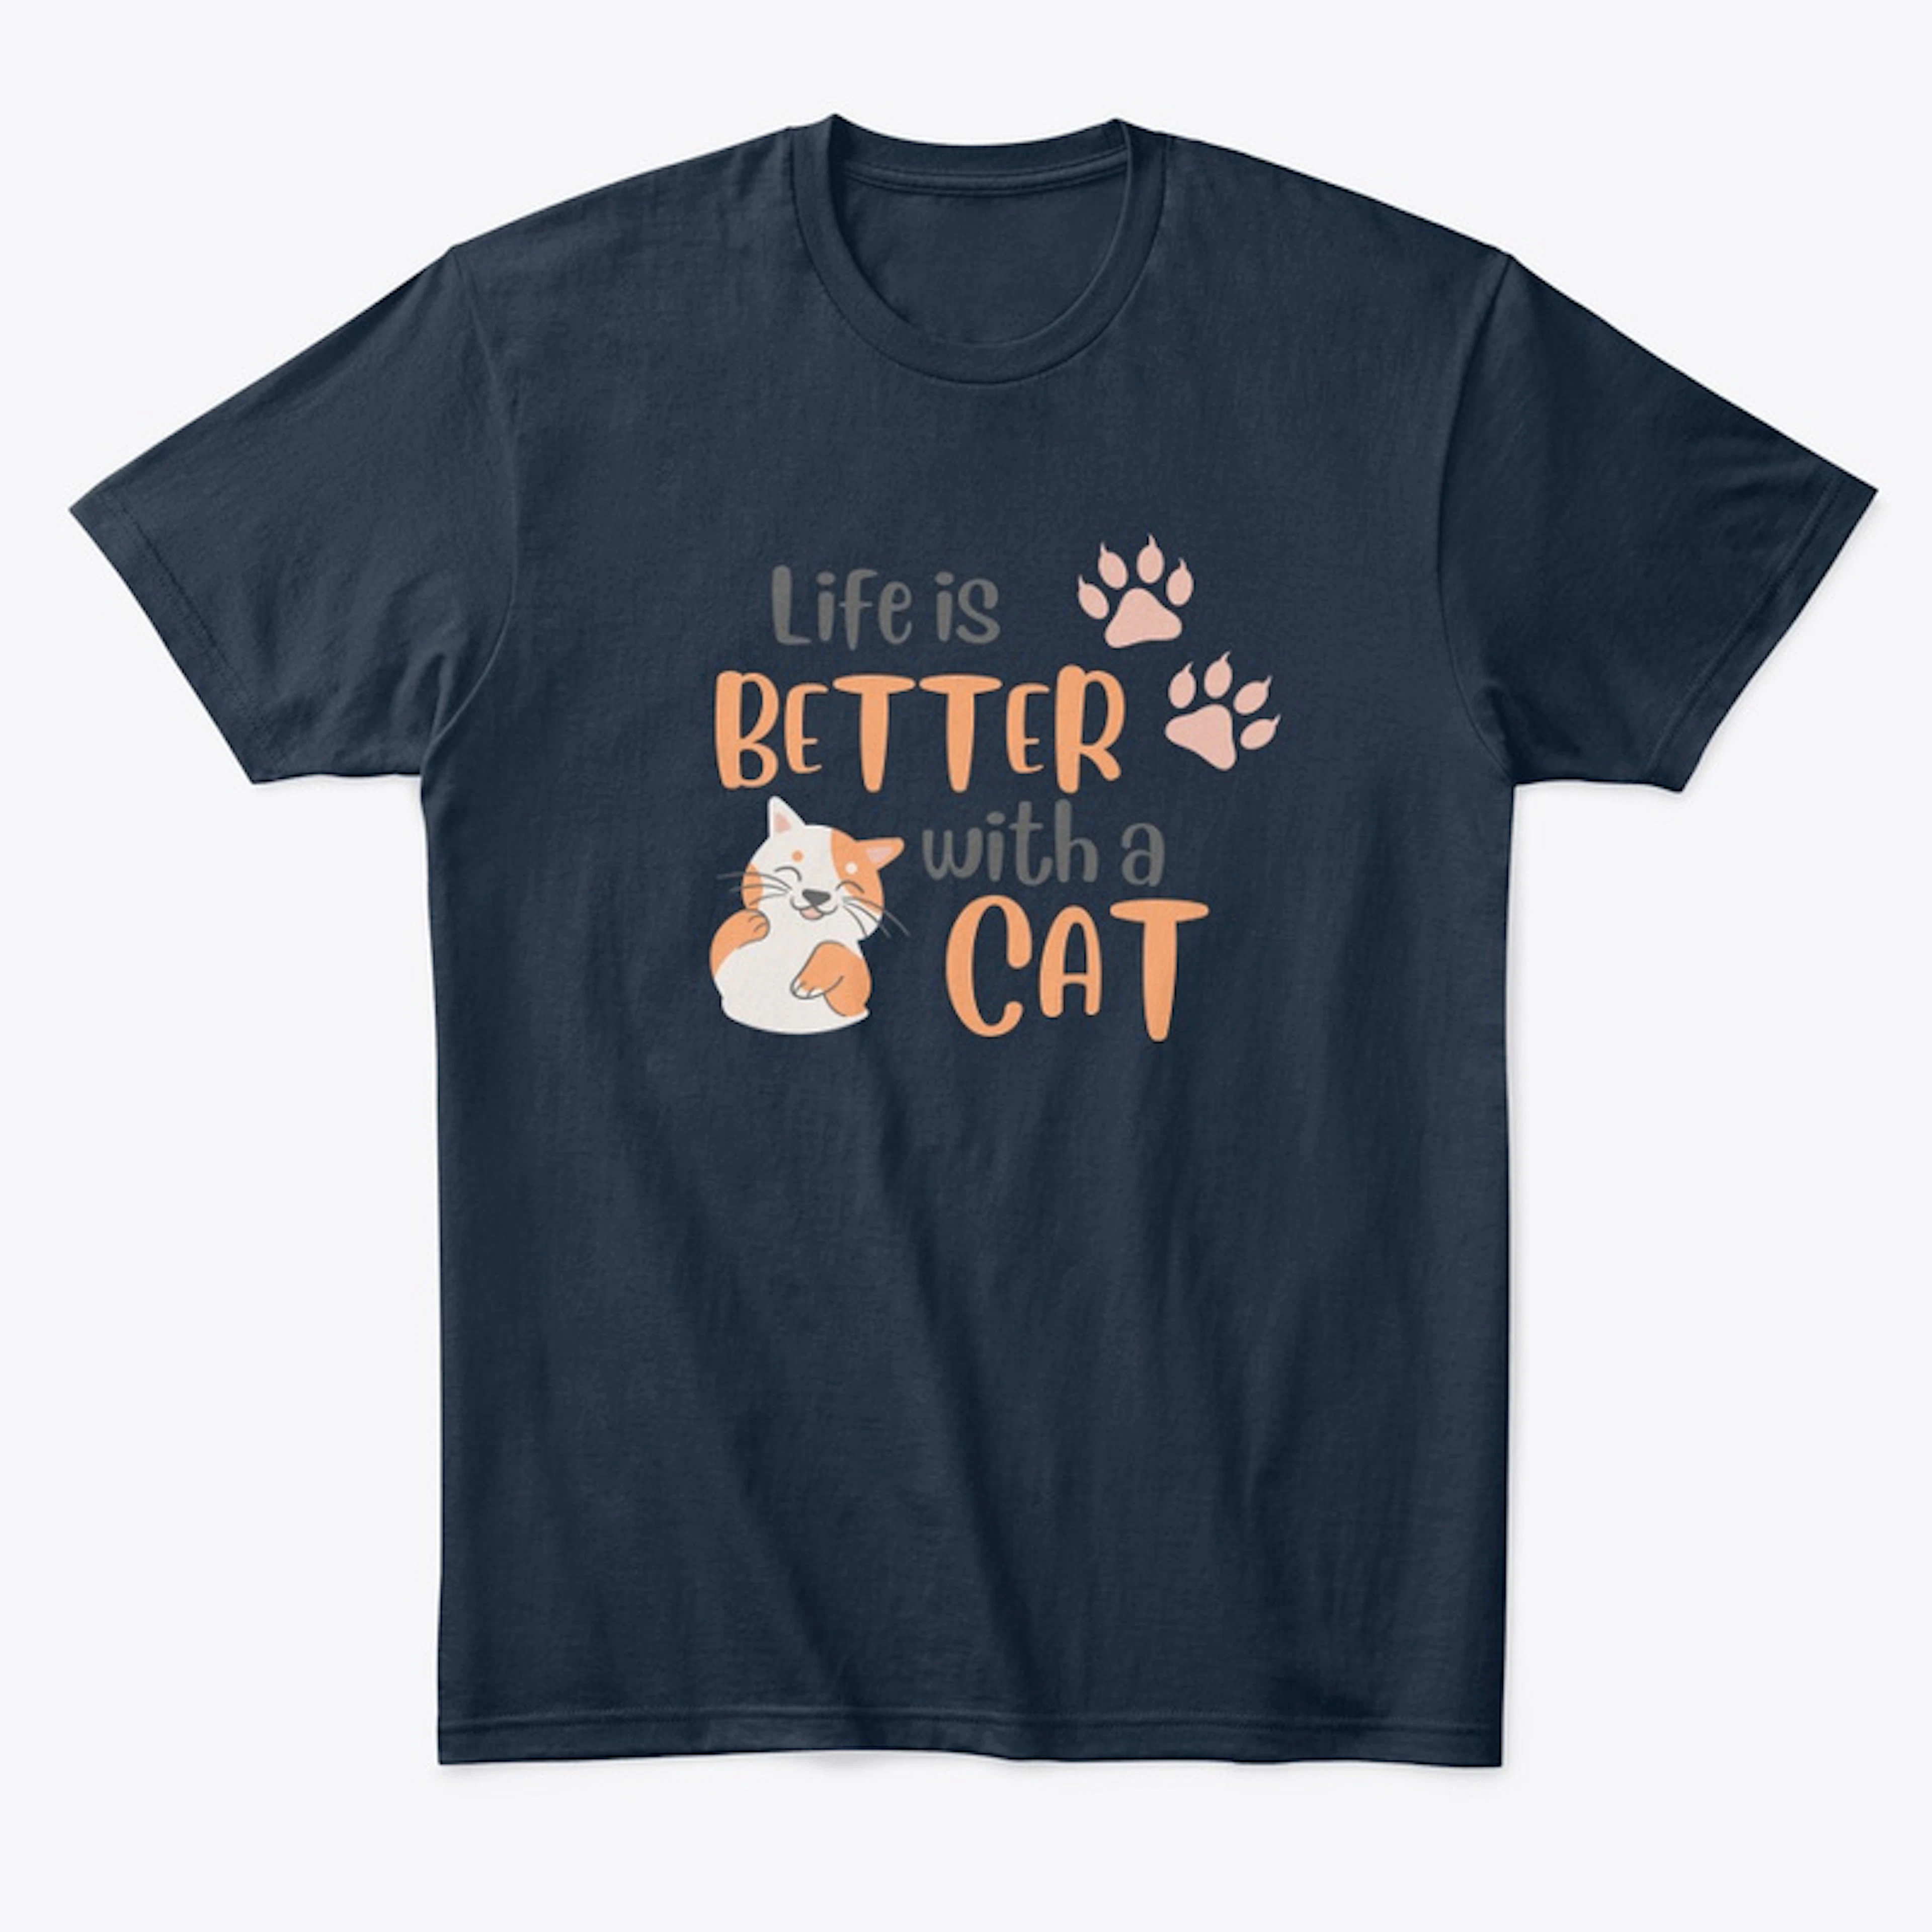 [ENDING SOON]Life is Better with a Cat